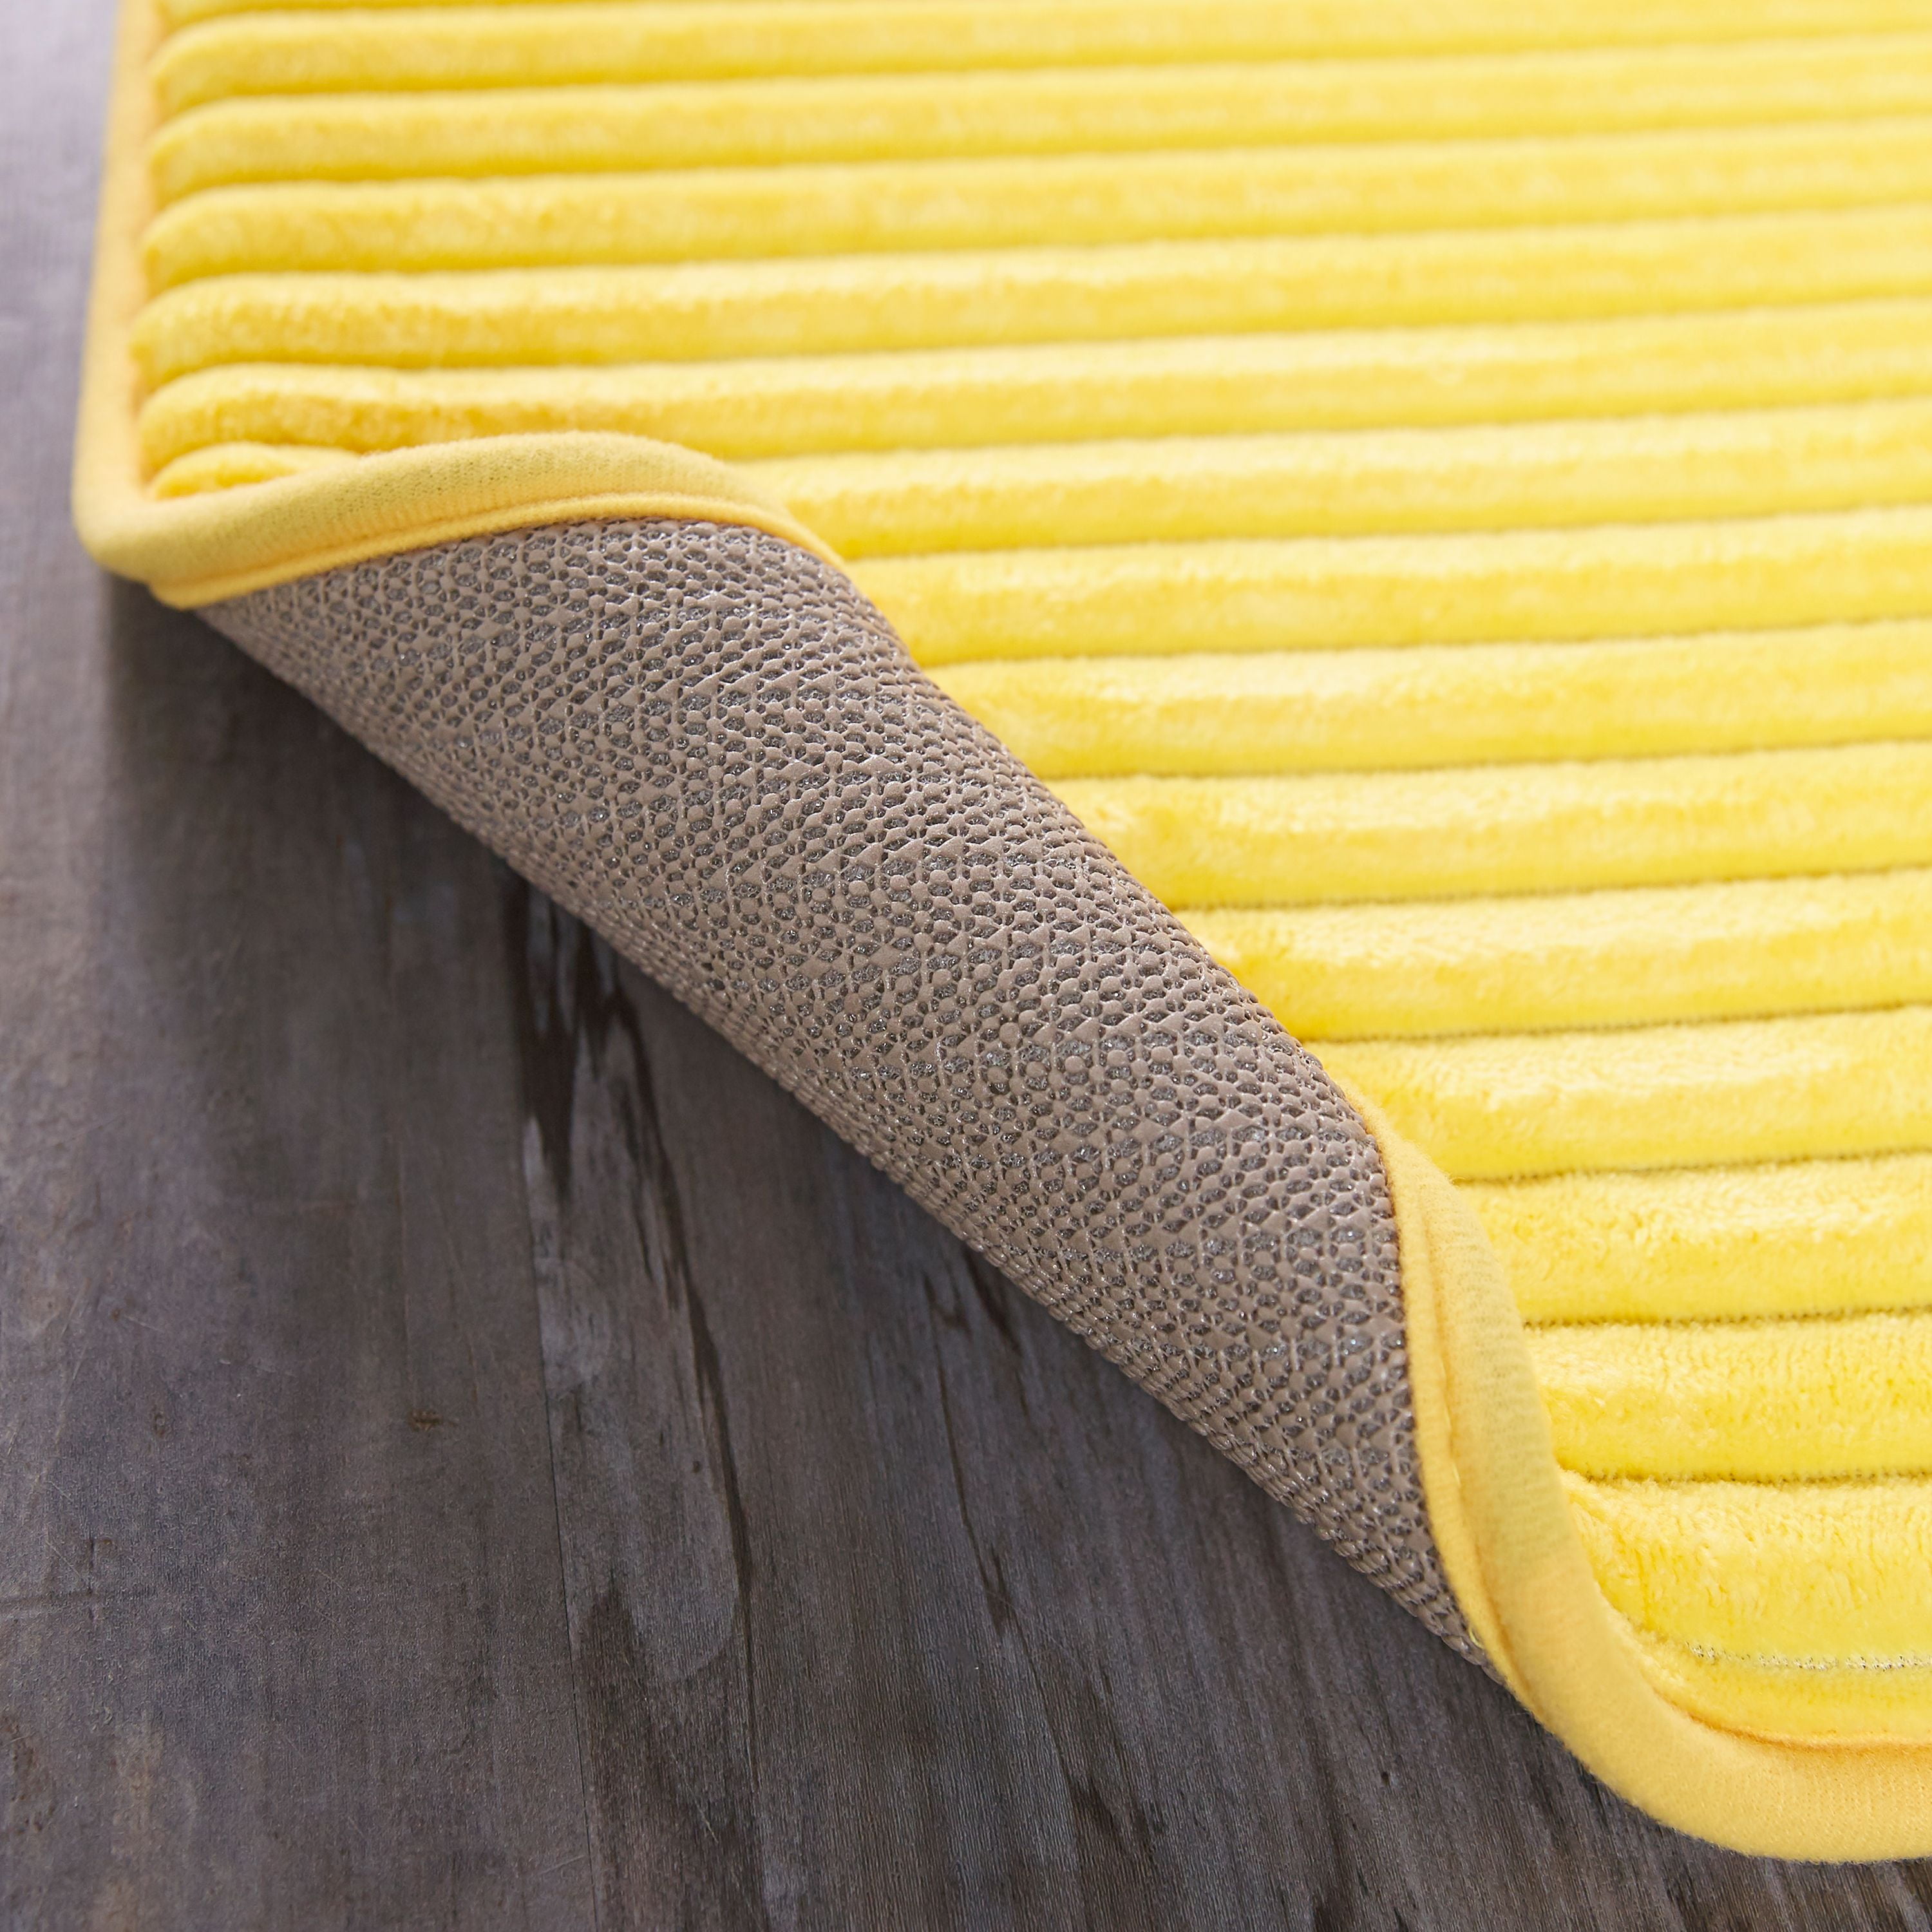 Bath Rug - Yellow, Size 17 x 24, Cotton | The Company Store